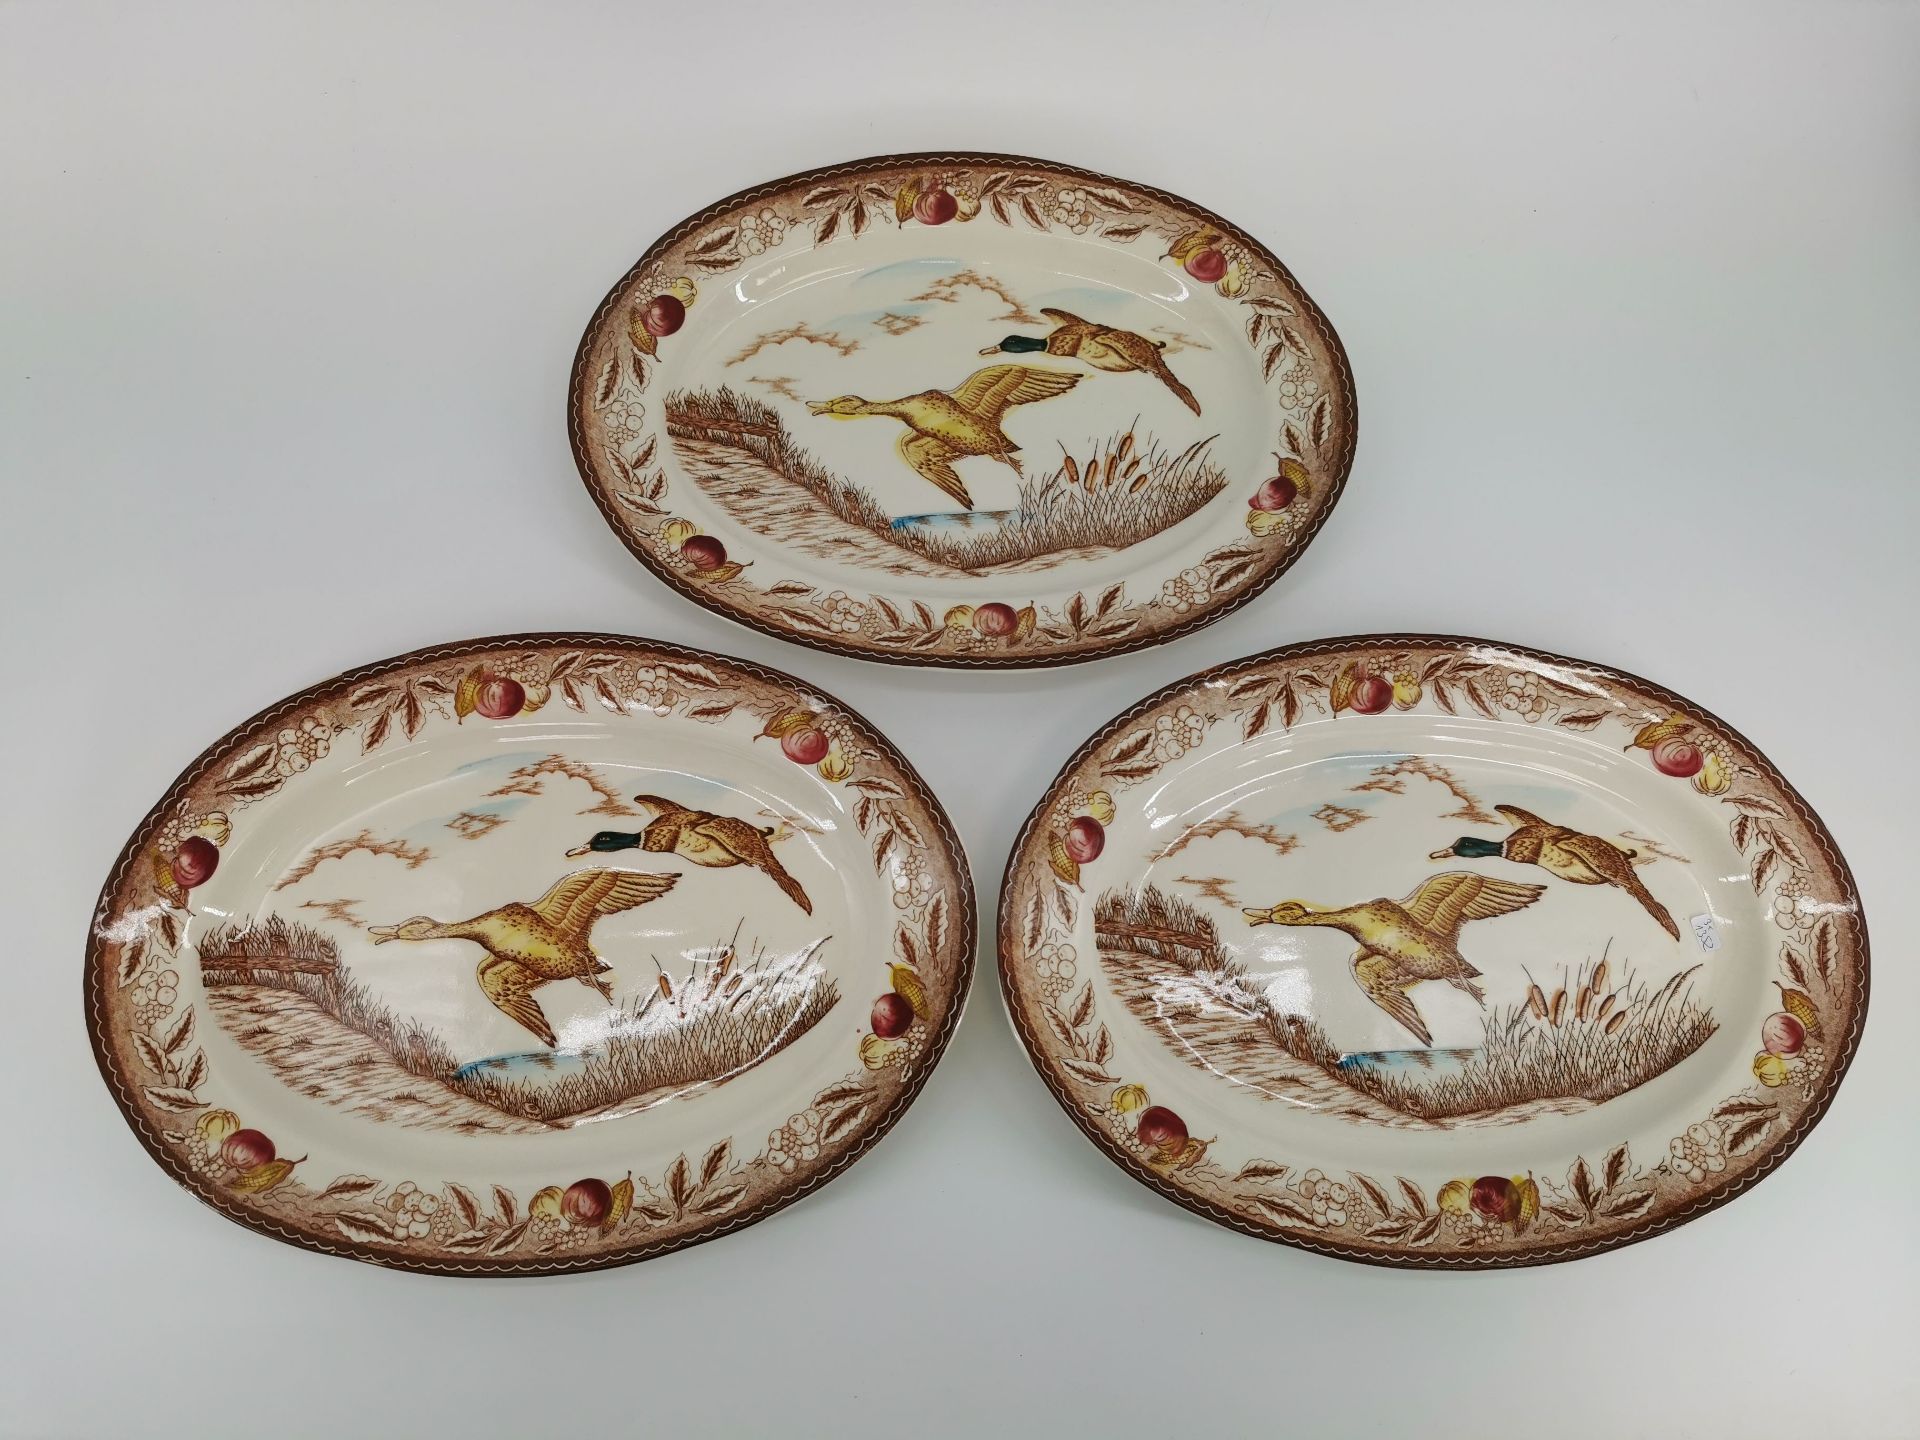 3 HUNTING SERVING PLATES